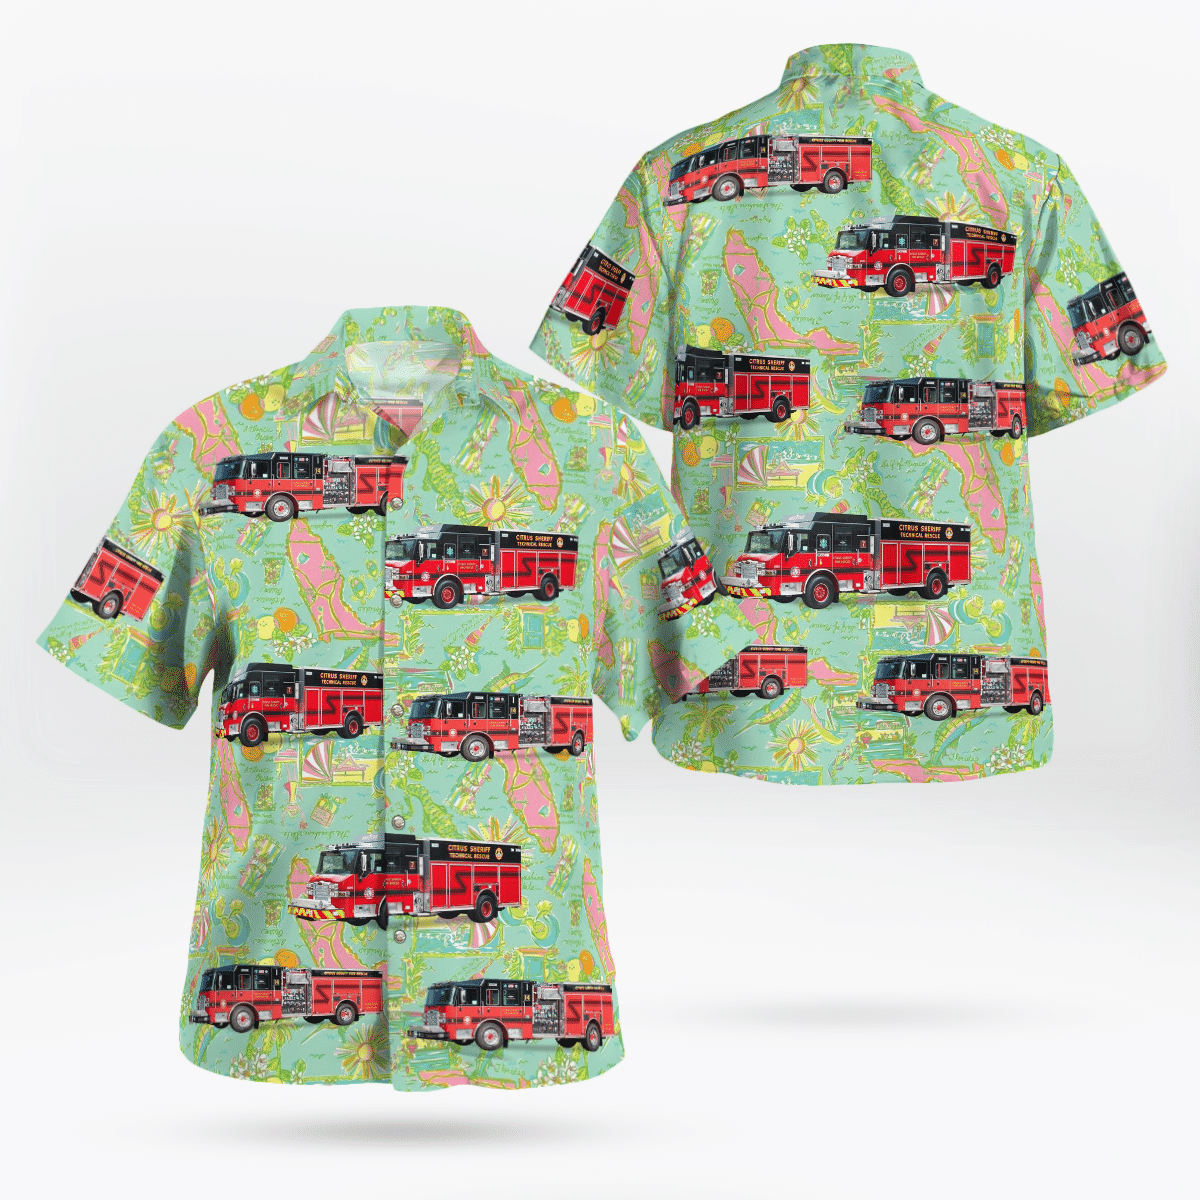 If you are in need of a new summertime look, pick up this Hawaiian shirt 9